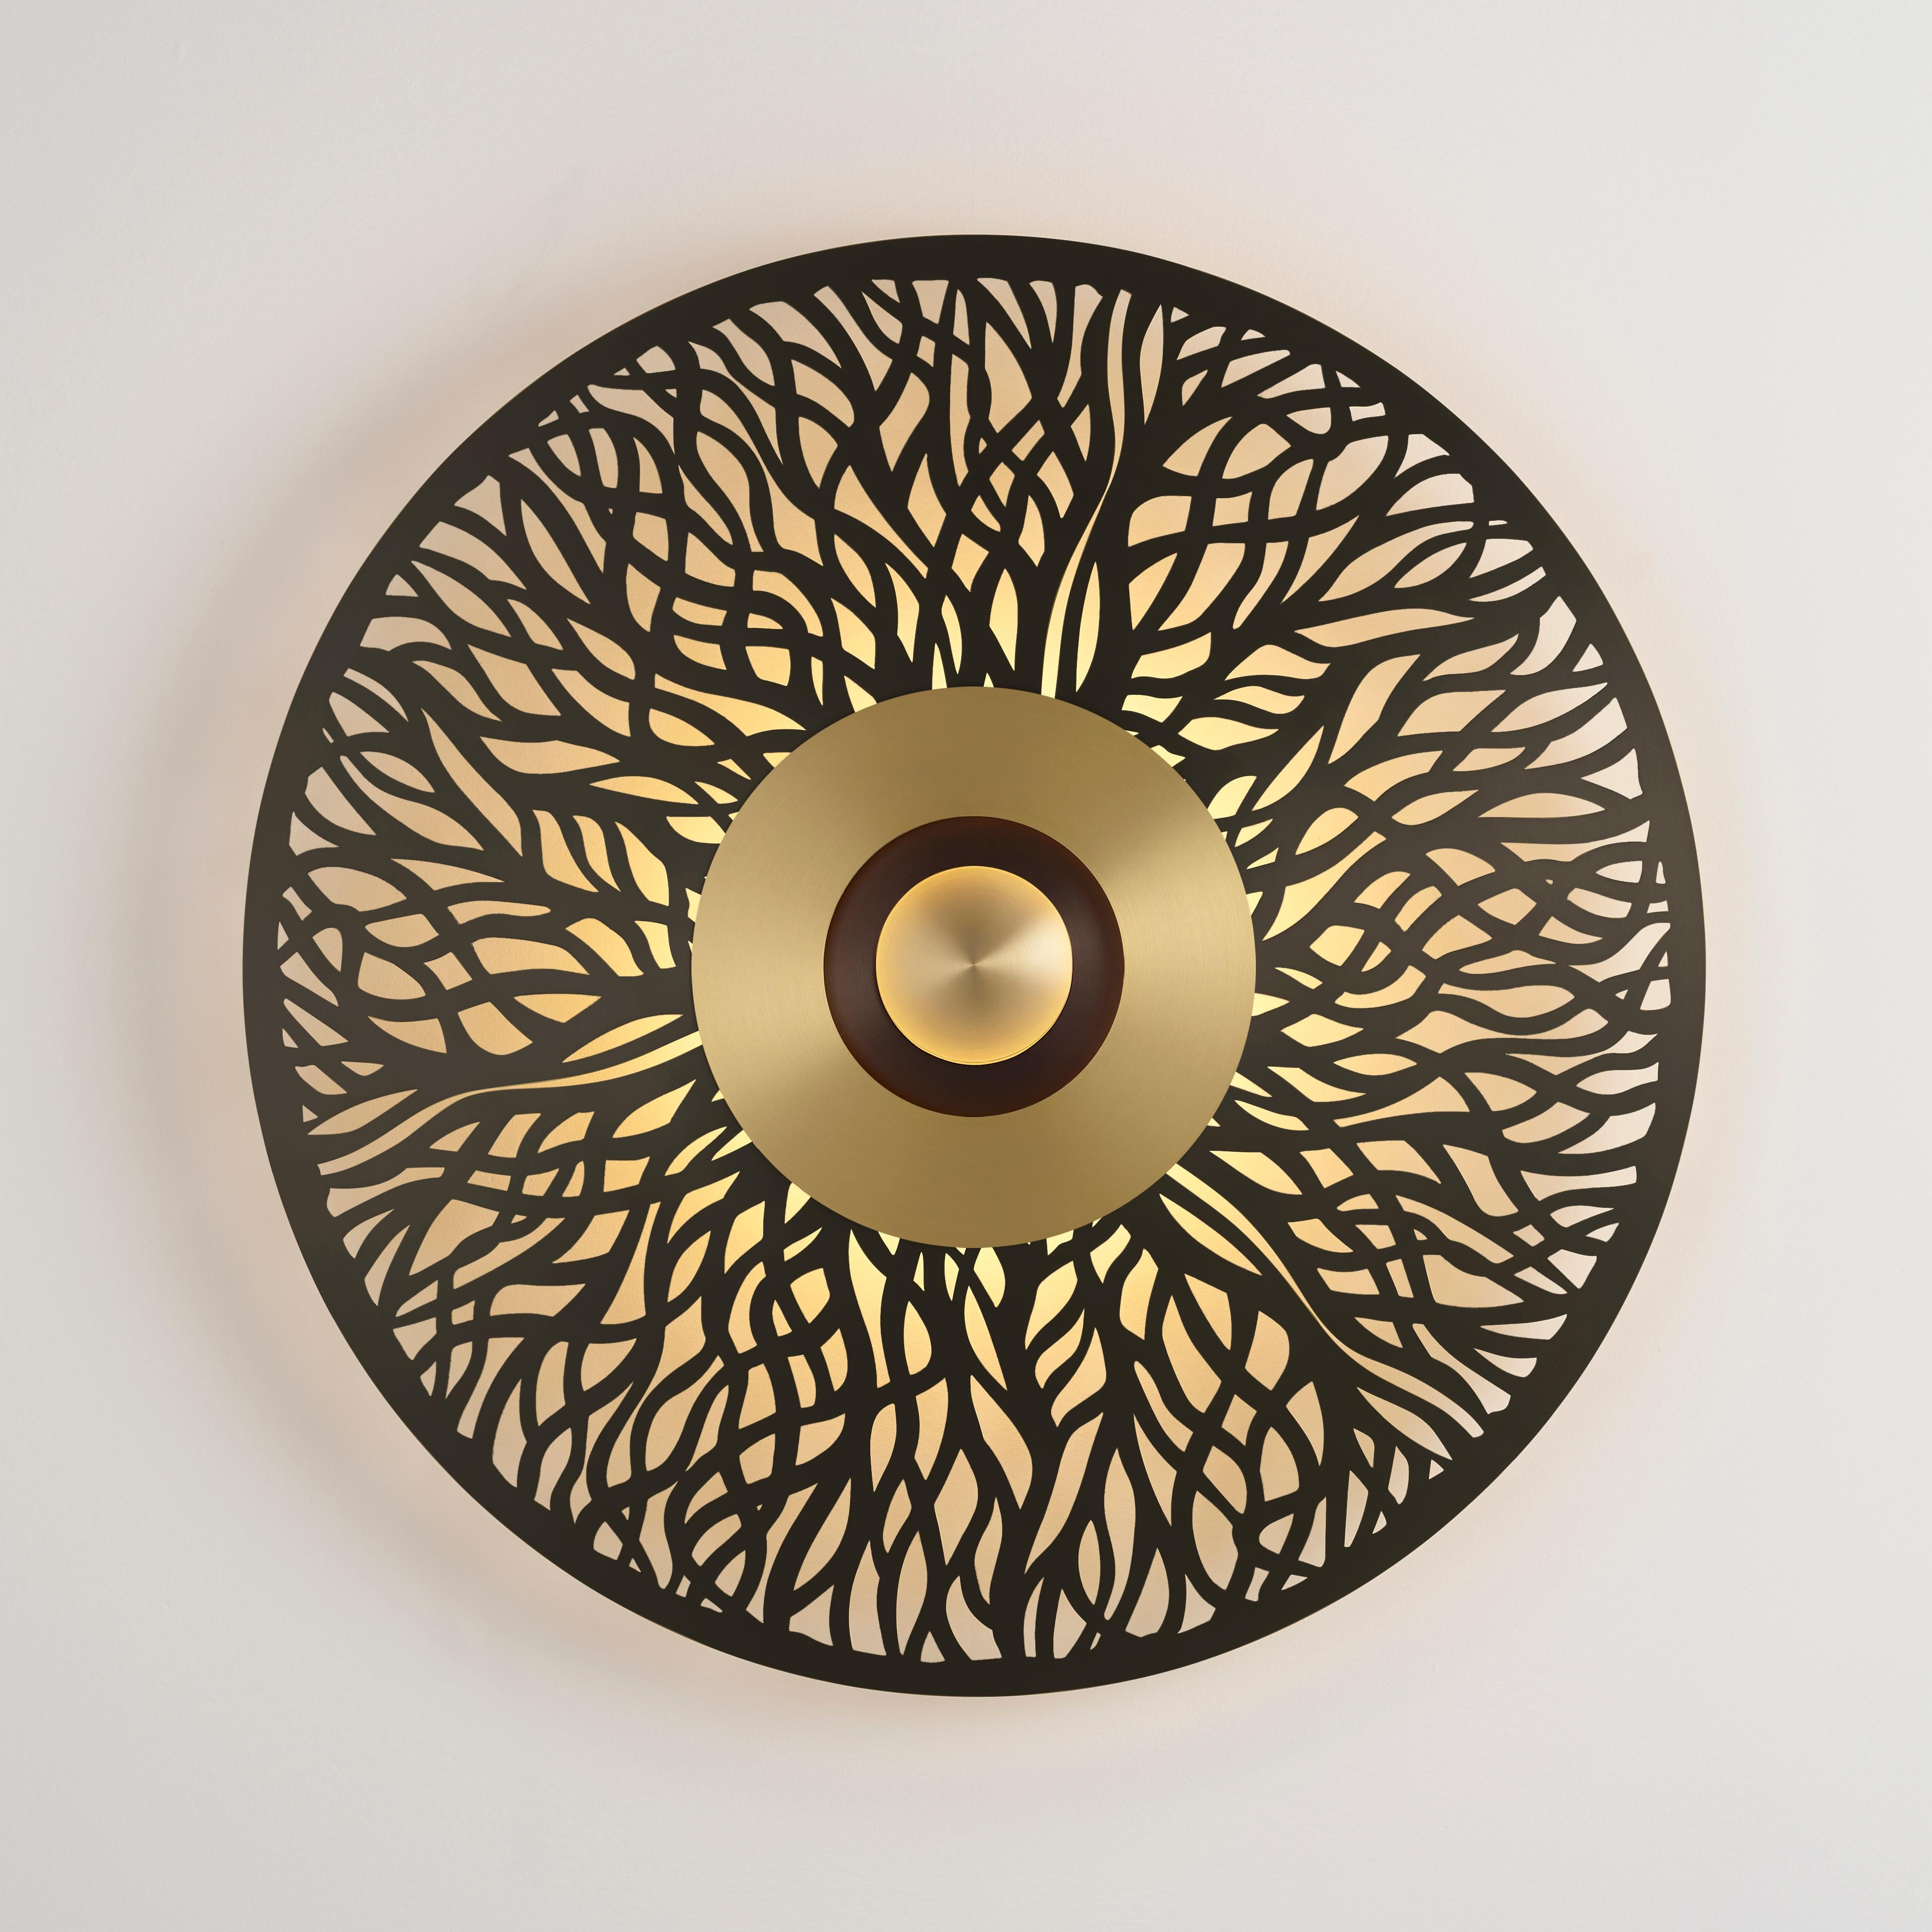 Atmos racine wall light by Emilie Cathelineau
Dimensions: D 83.7 cm
Materials: Solid brass, Polycarbonate diffuser.
Others finishes and dimensions are available.

All our lamps can be wired according to each country. If sold to the USA it will